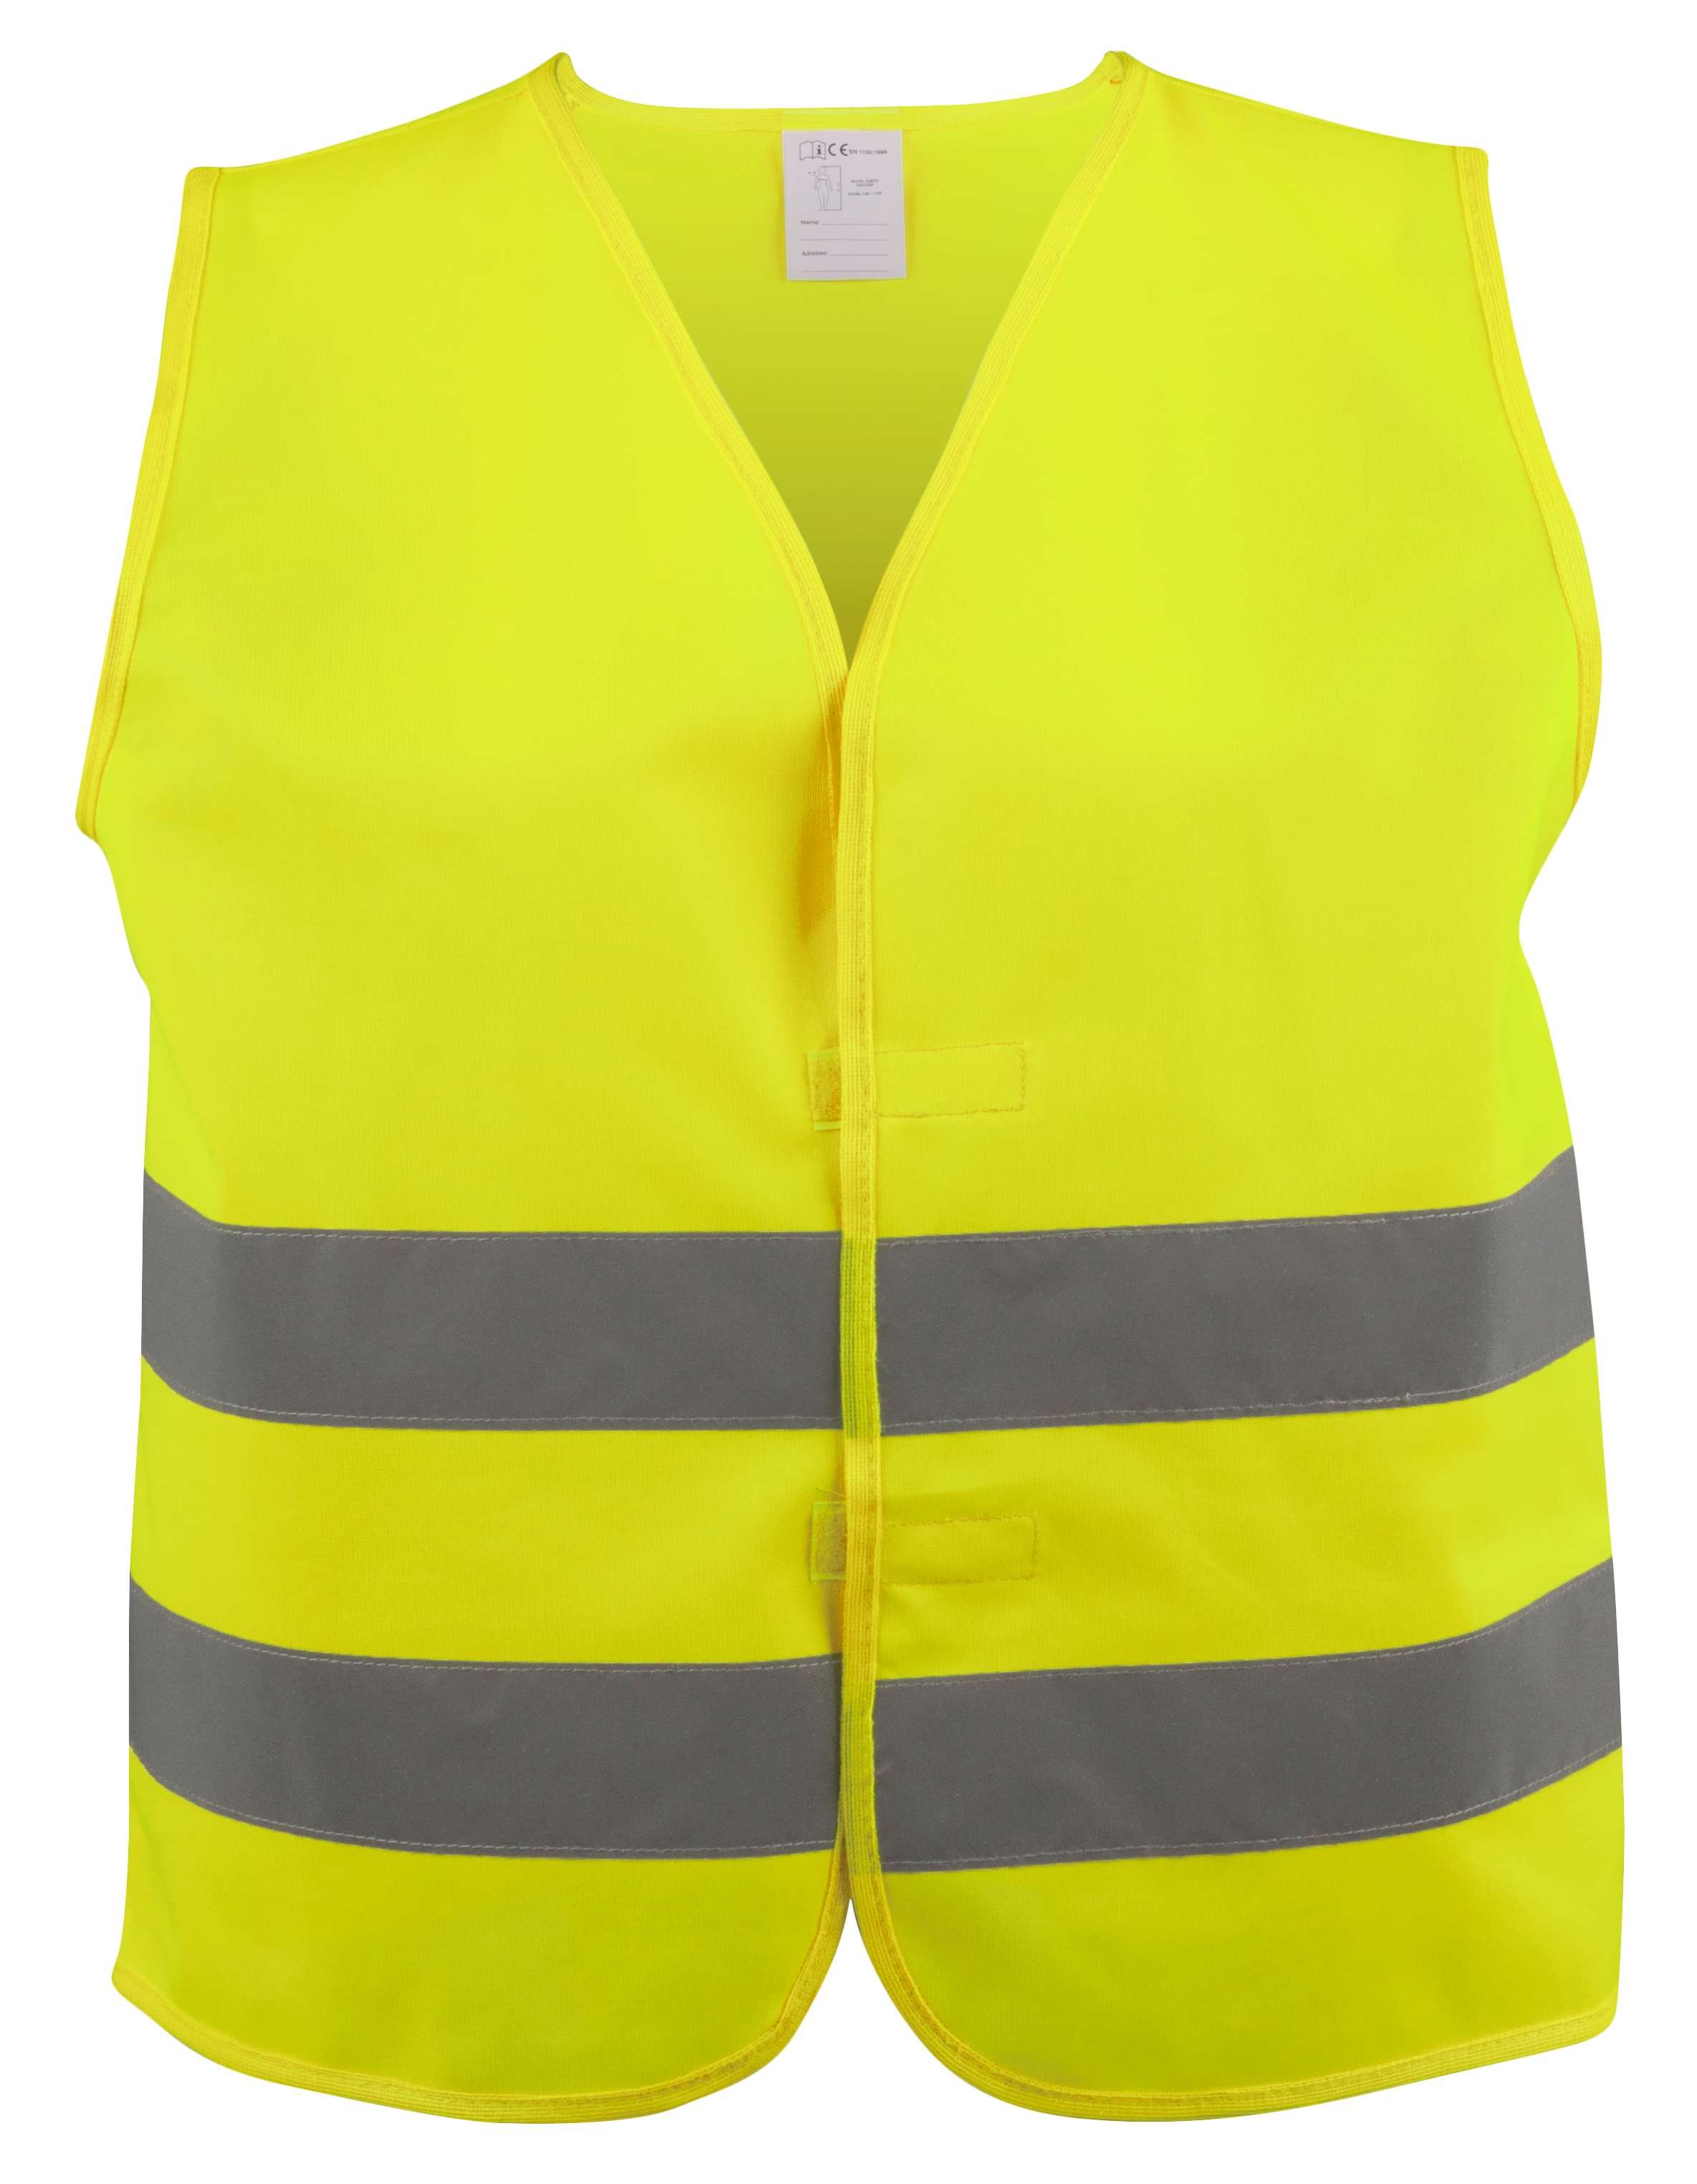 Safety vest size XL for adults Yellow EN 20471/2